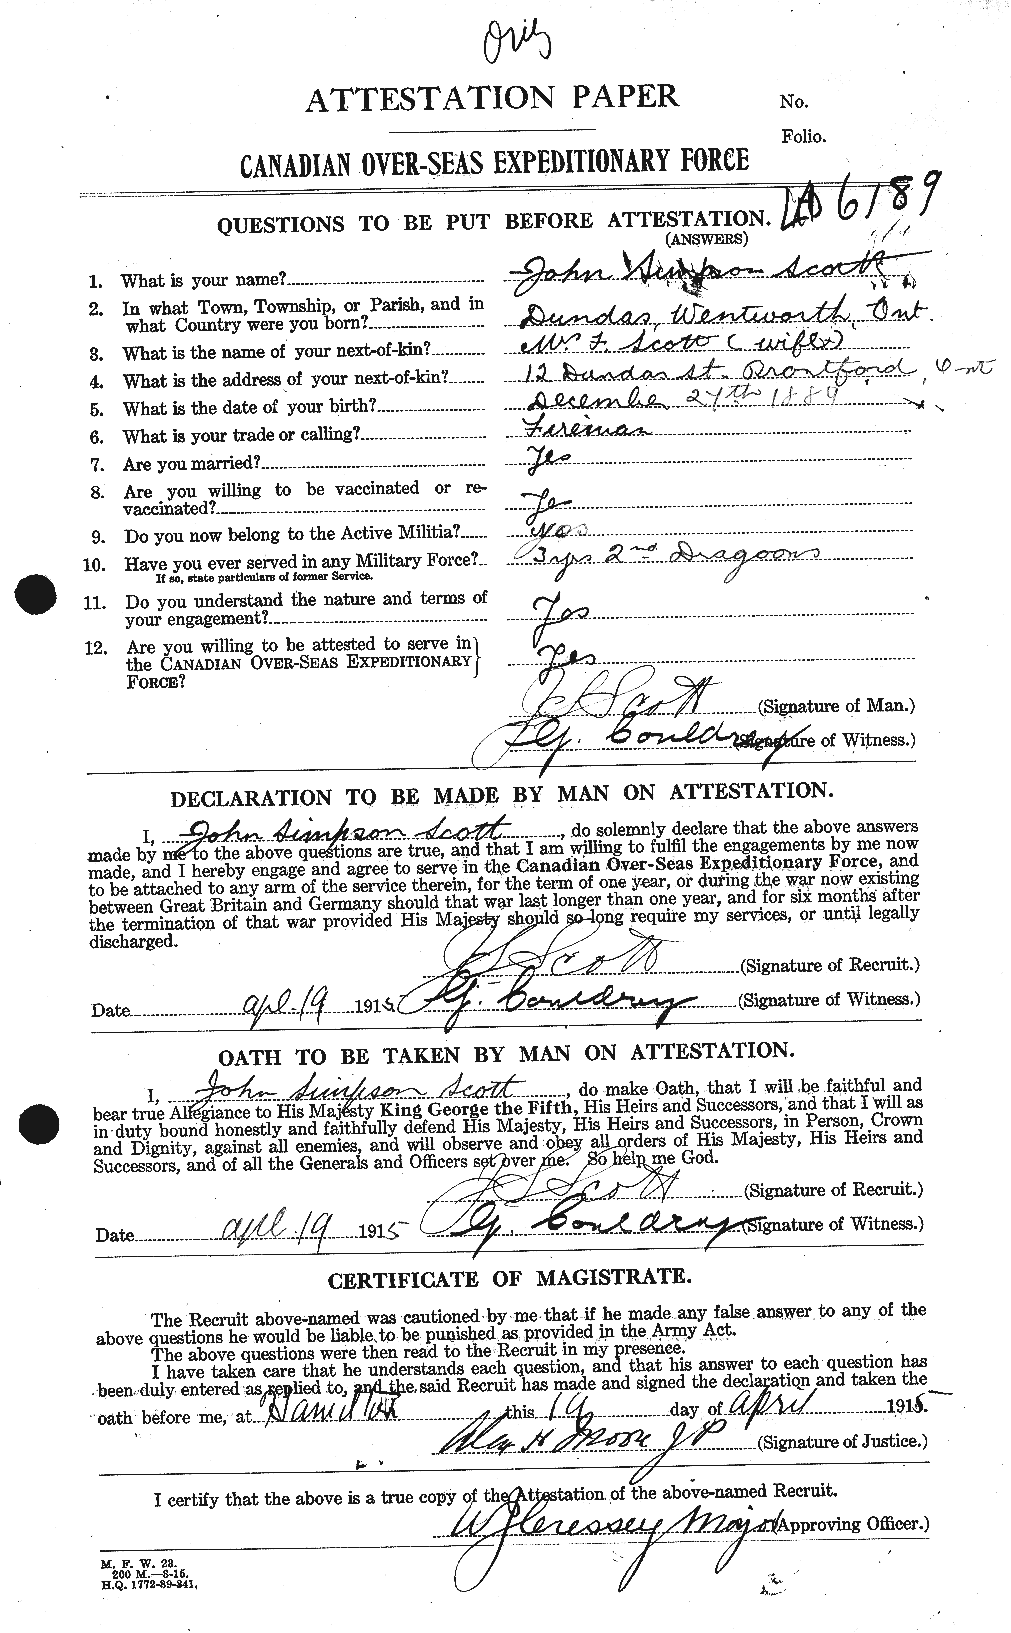 Personnel Records of the First World War - CEF 084428a